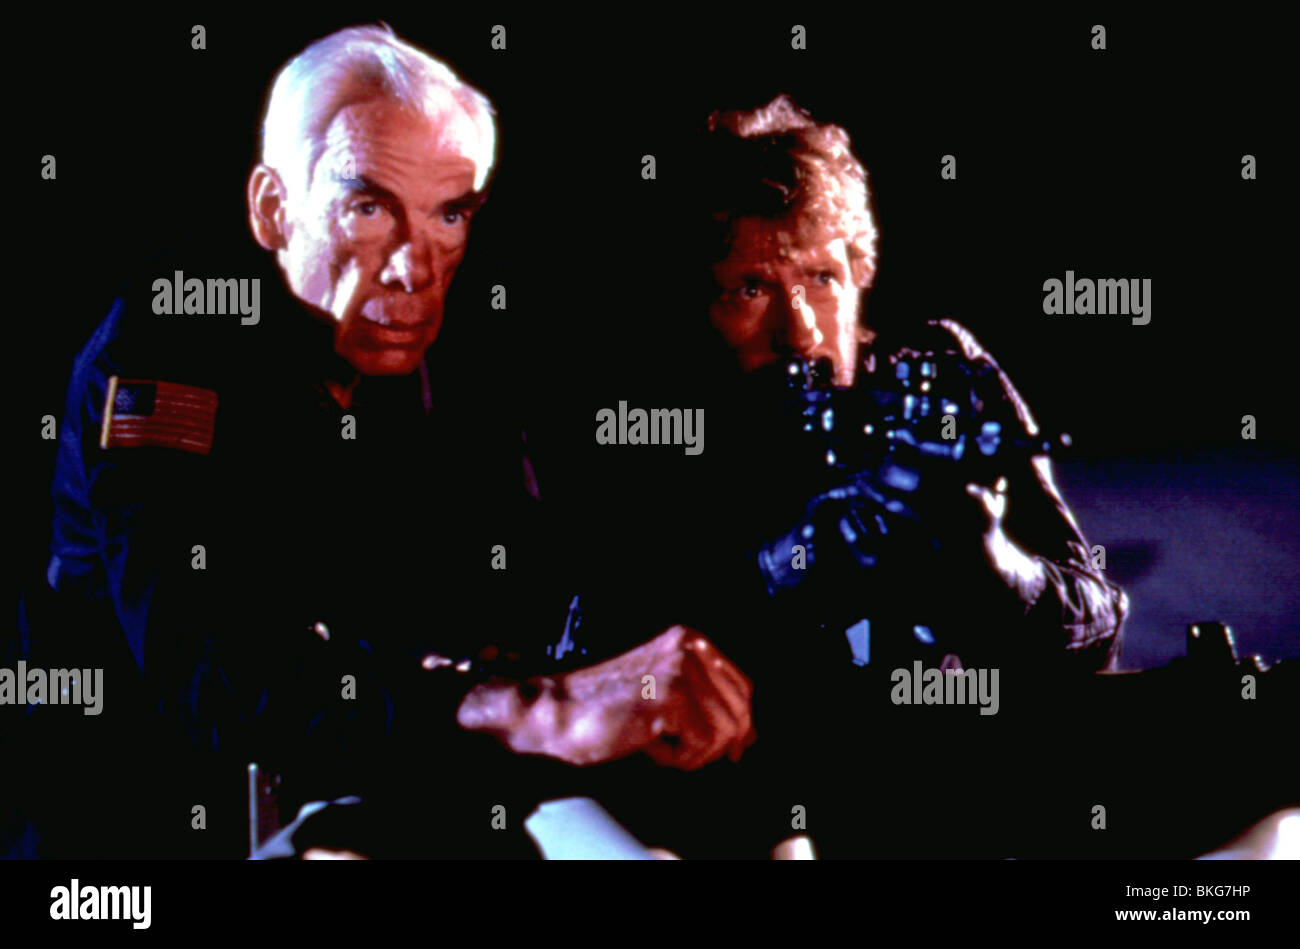 THE DELTA FORCE (1986) LEE MARVIN, CHUCK NORRIS DLF 011 Stock Photo